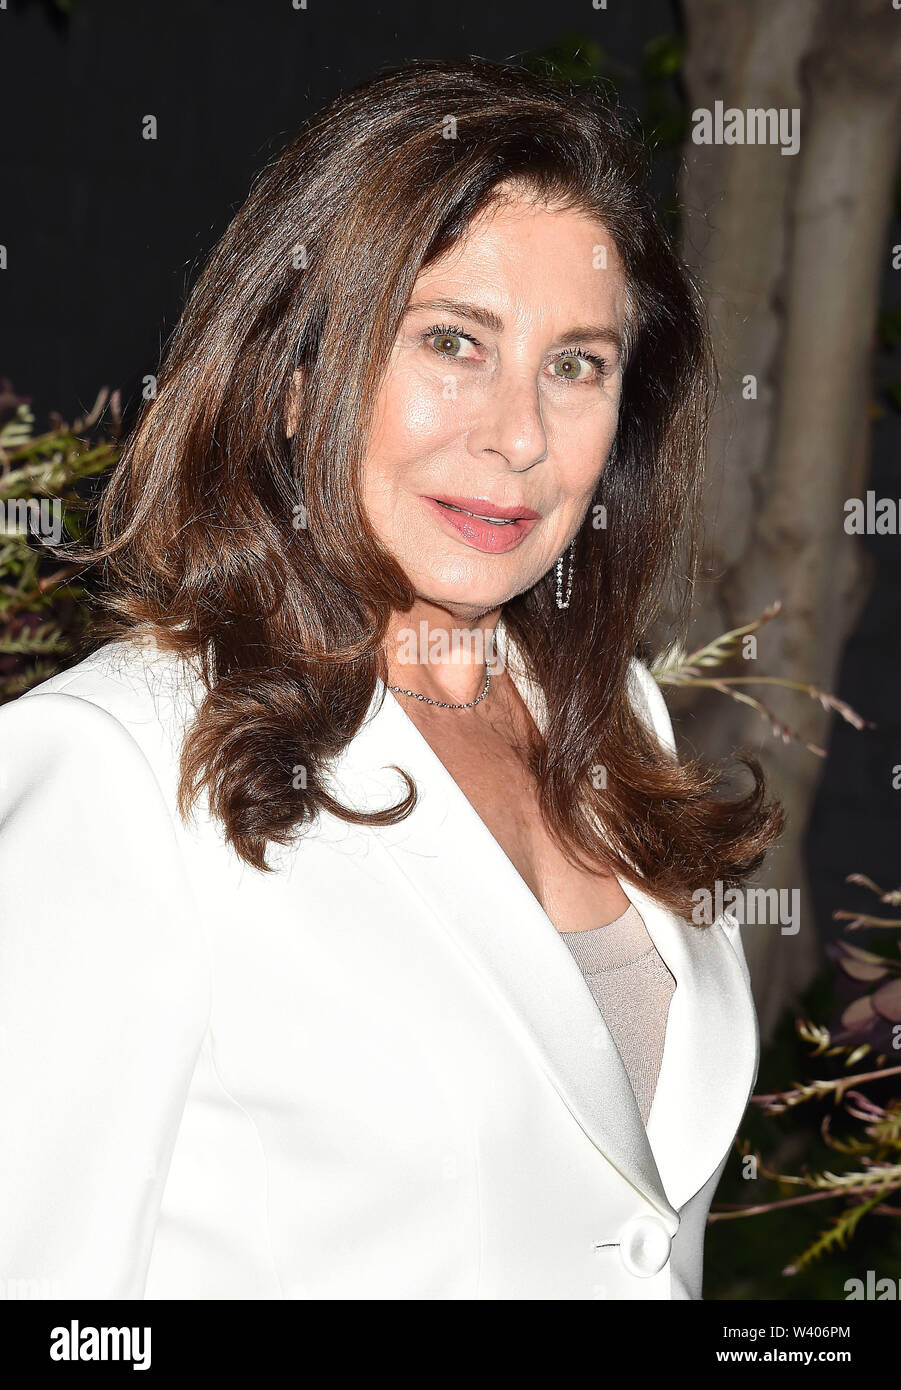 LOS ANGELES, CA - JULY 17: Paula Wagner attends the Brain Health Initiative 100th Anniversary Of Women's Suffrage Gala at Eric Buterbaugh Los Angeles on July 17, 2019 in Los Angeles, California. Stock Photo